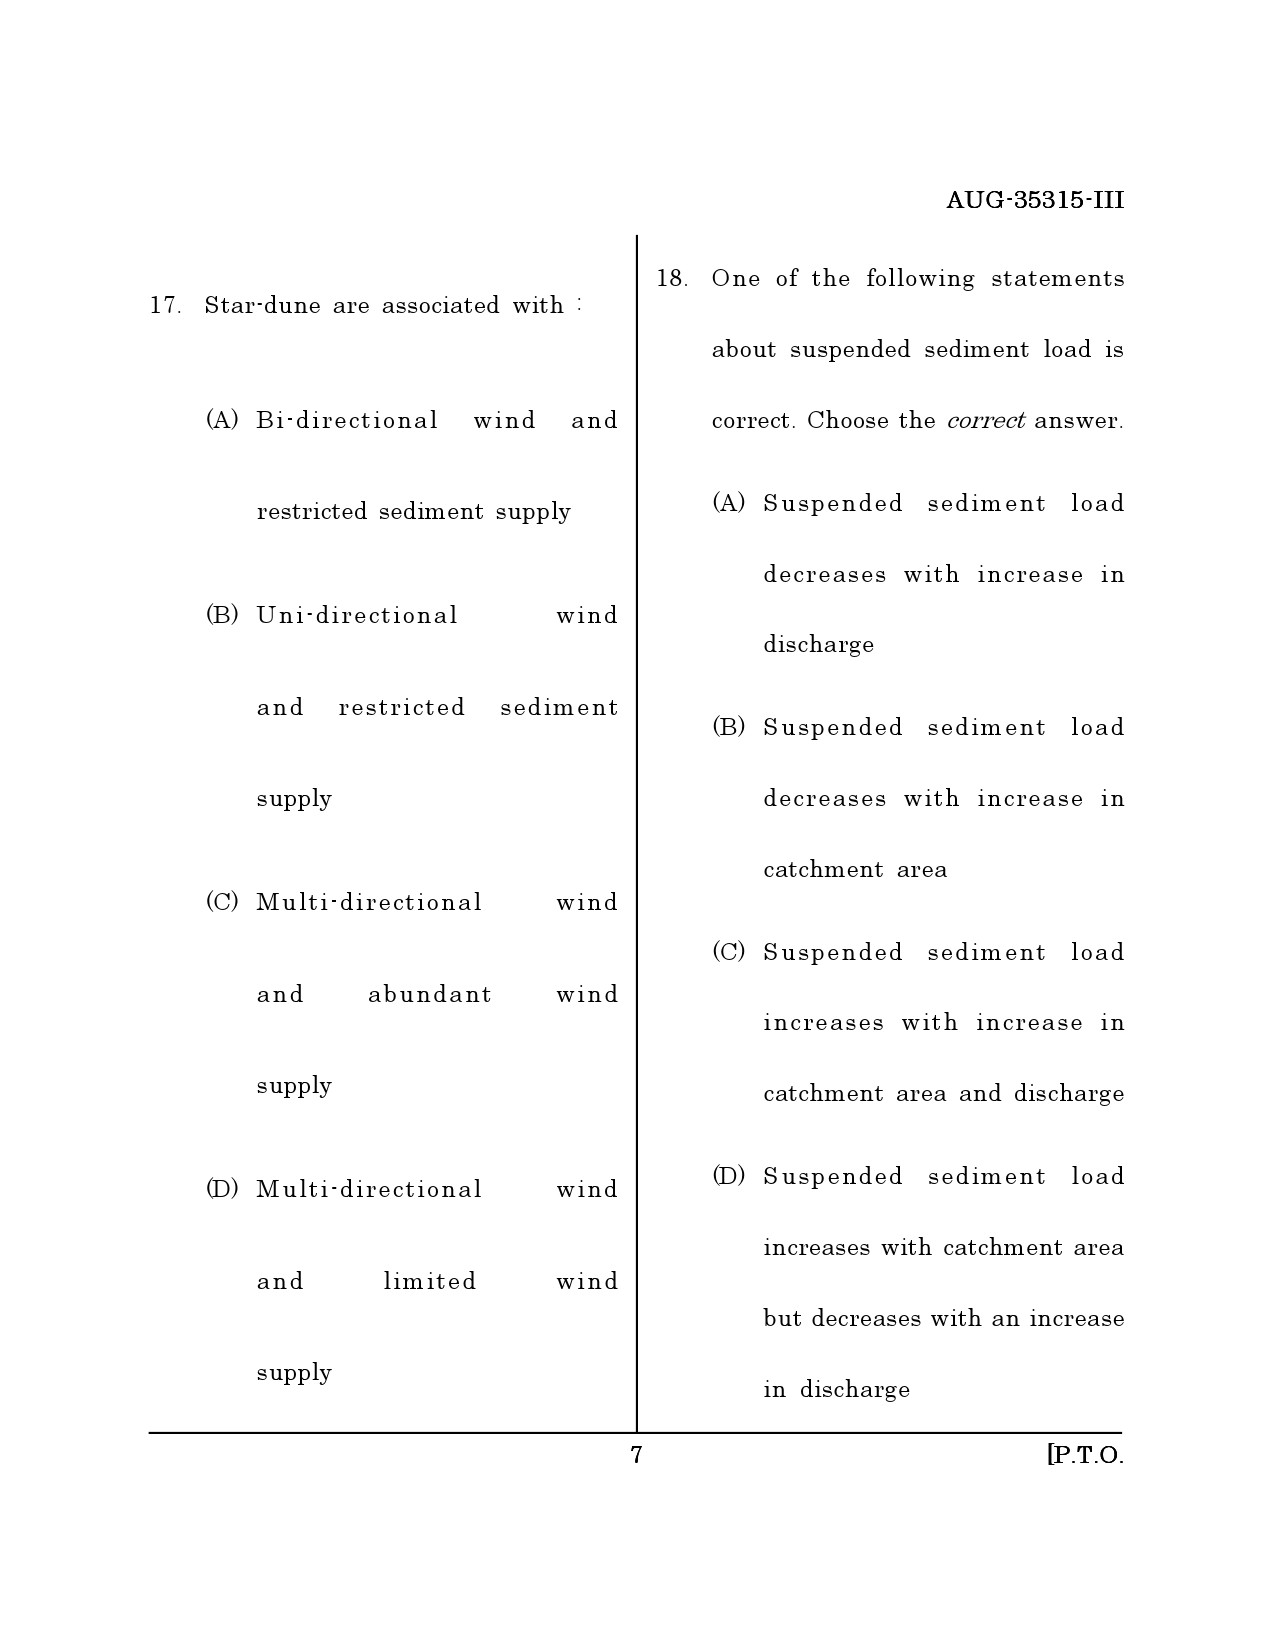 Maharashtra SET Earth Atmospheric Ocean Planetary Science Question Paper III August 2015 6